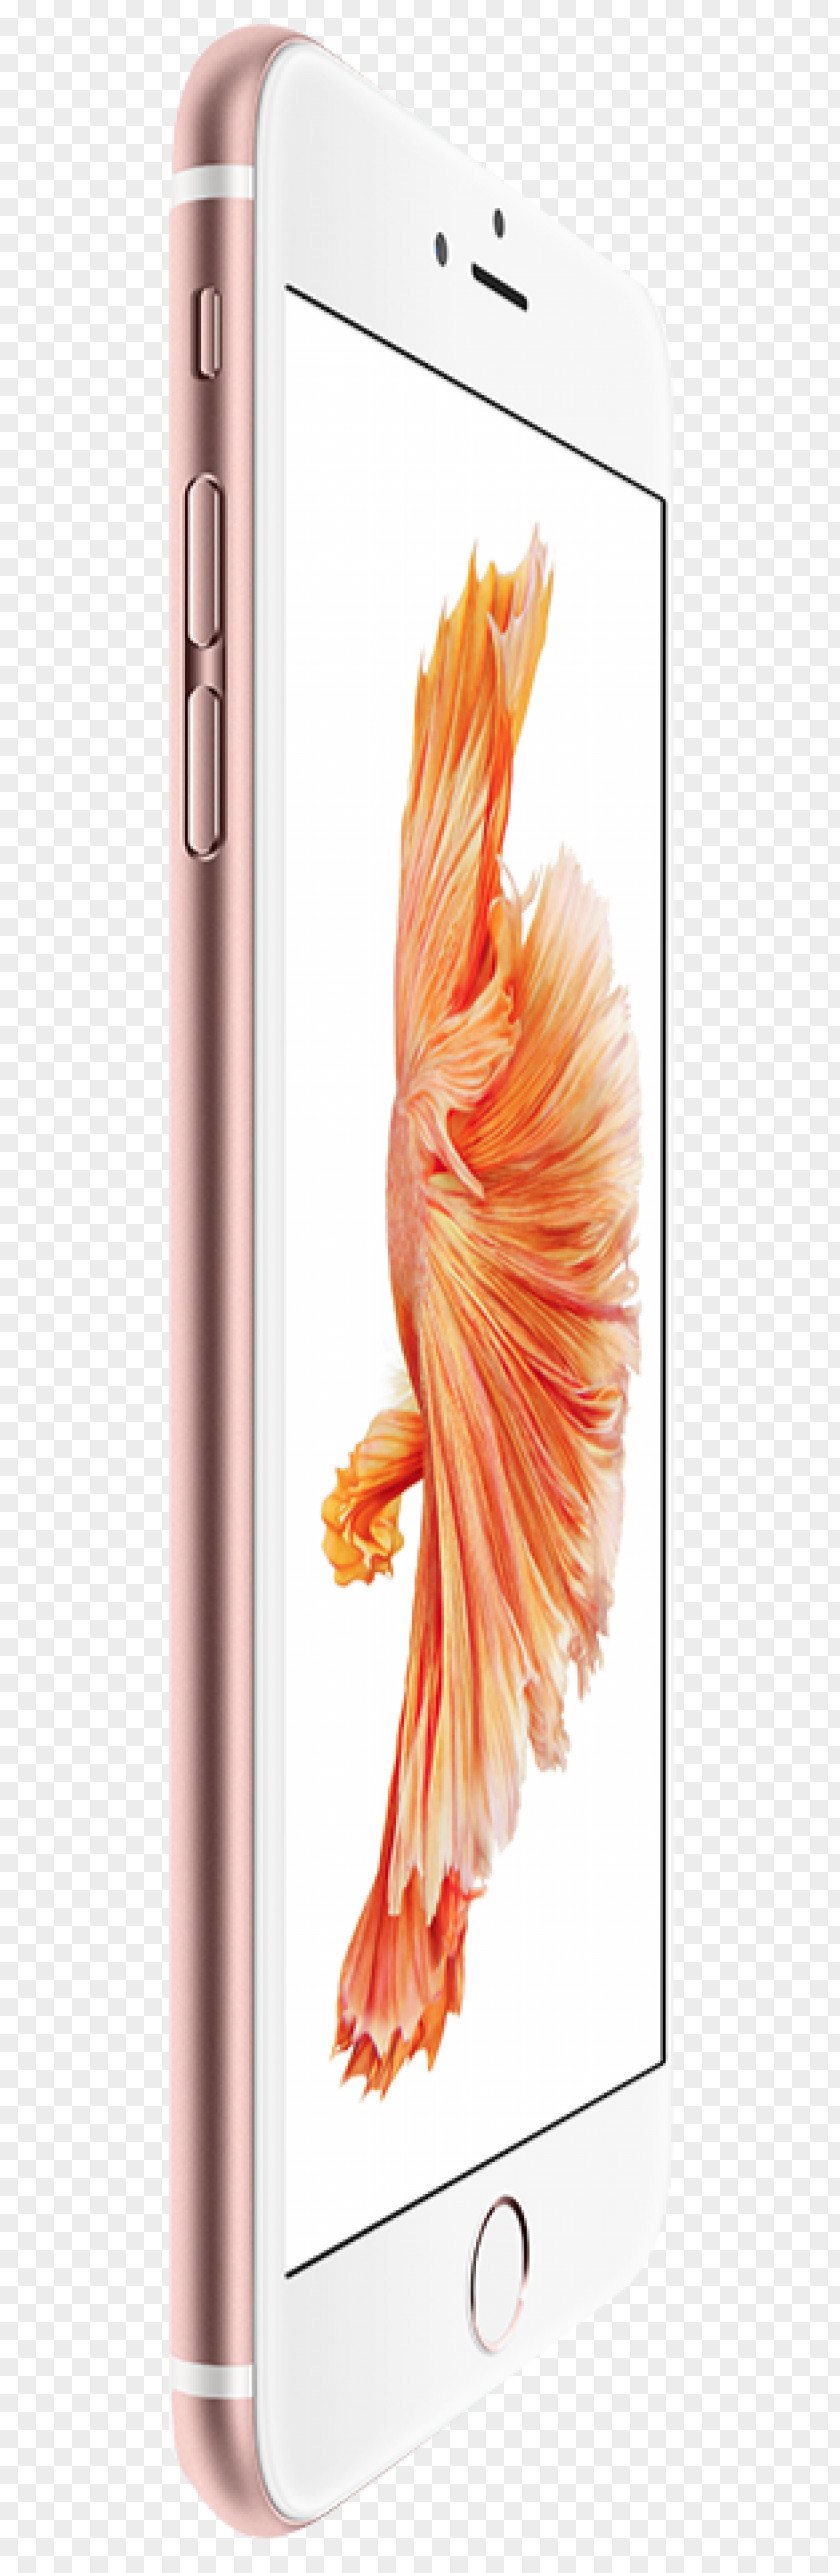 Iphone Apple IPhone 6 Plus 6s 8 7 PNG